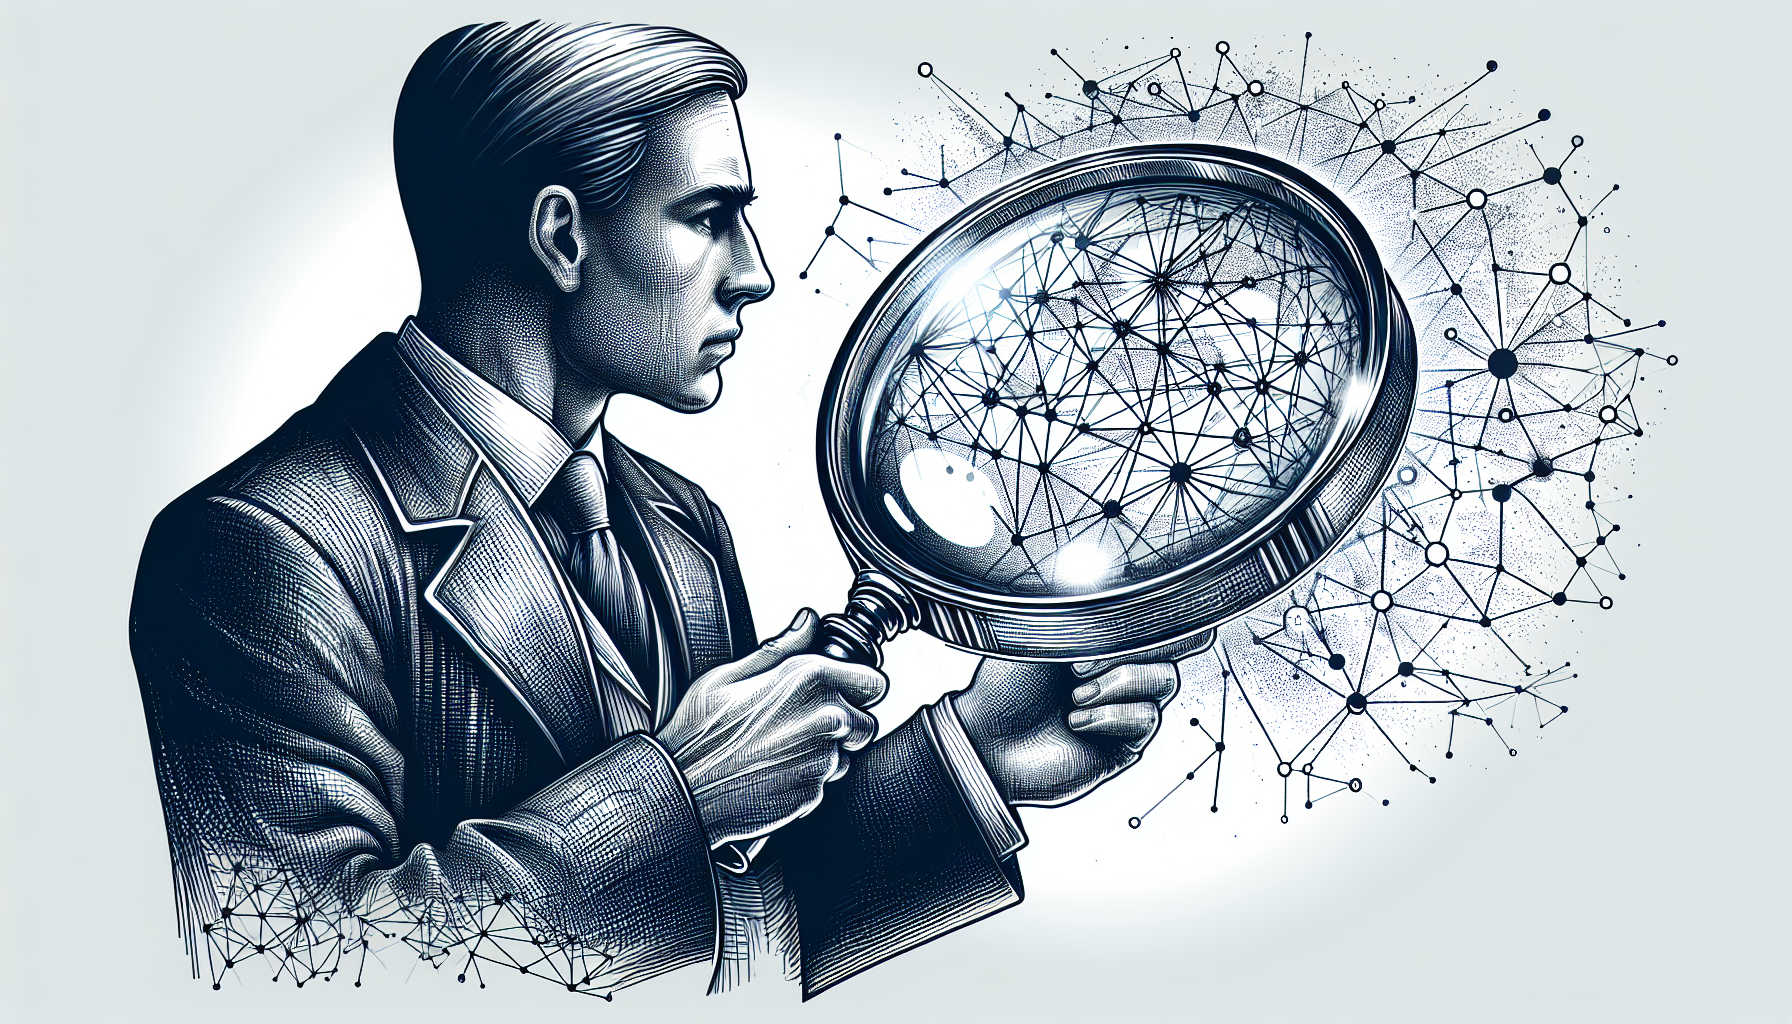 Illustration of a person holding a magnifying glass, symbolizing attention to detail and care